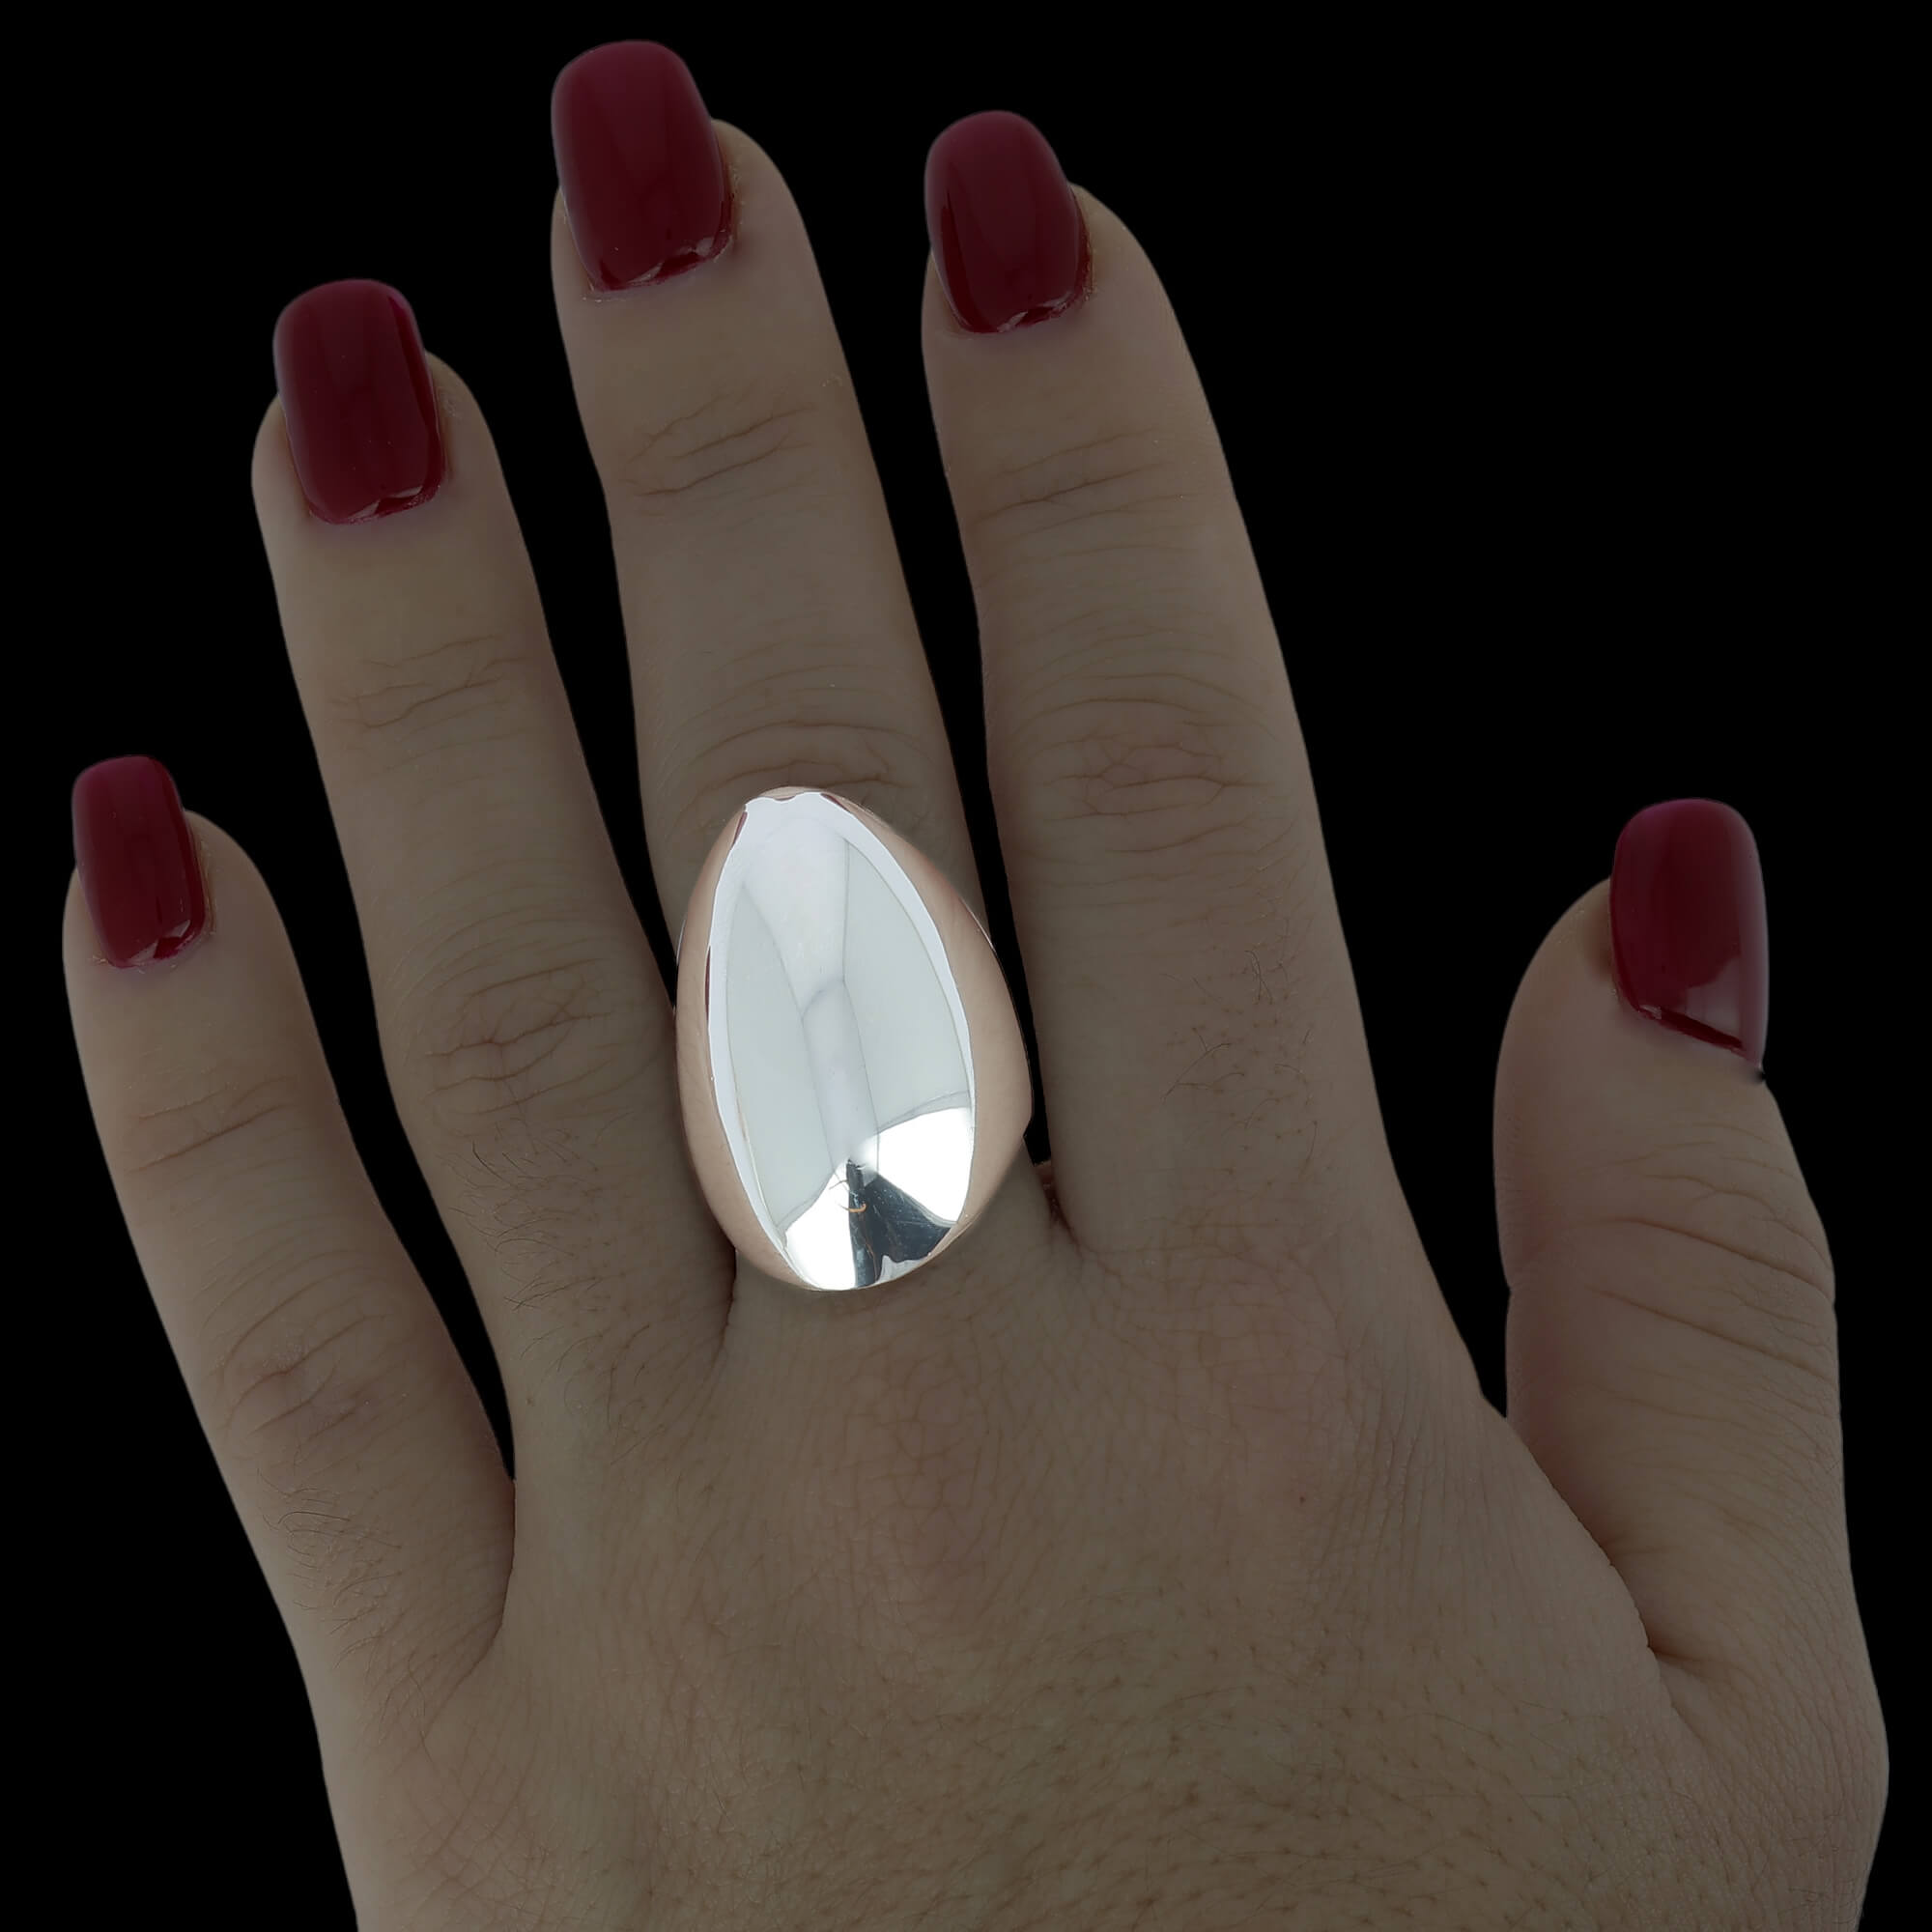 Sleek silver polished and elongated ring